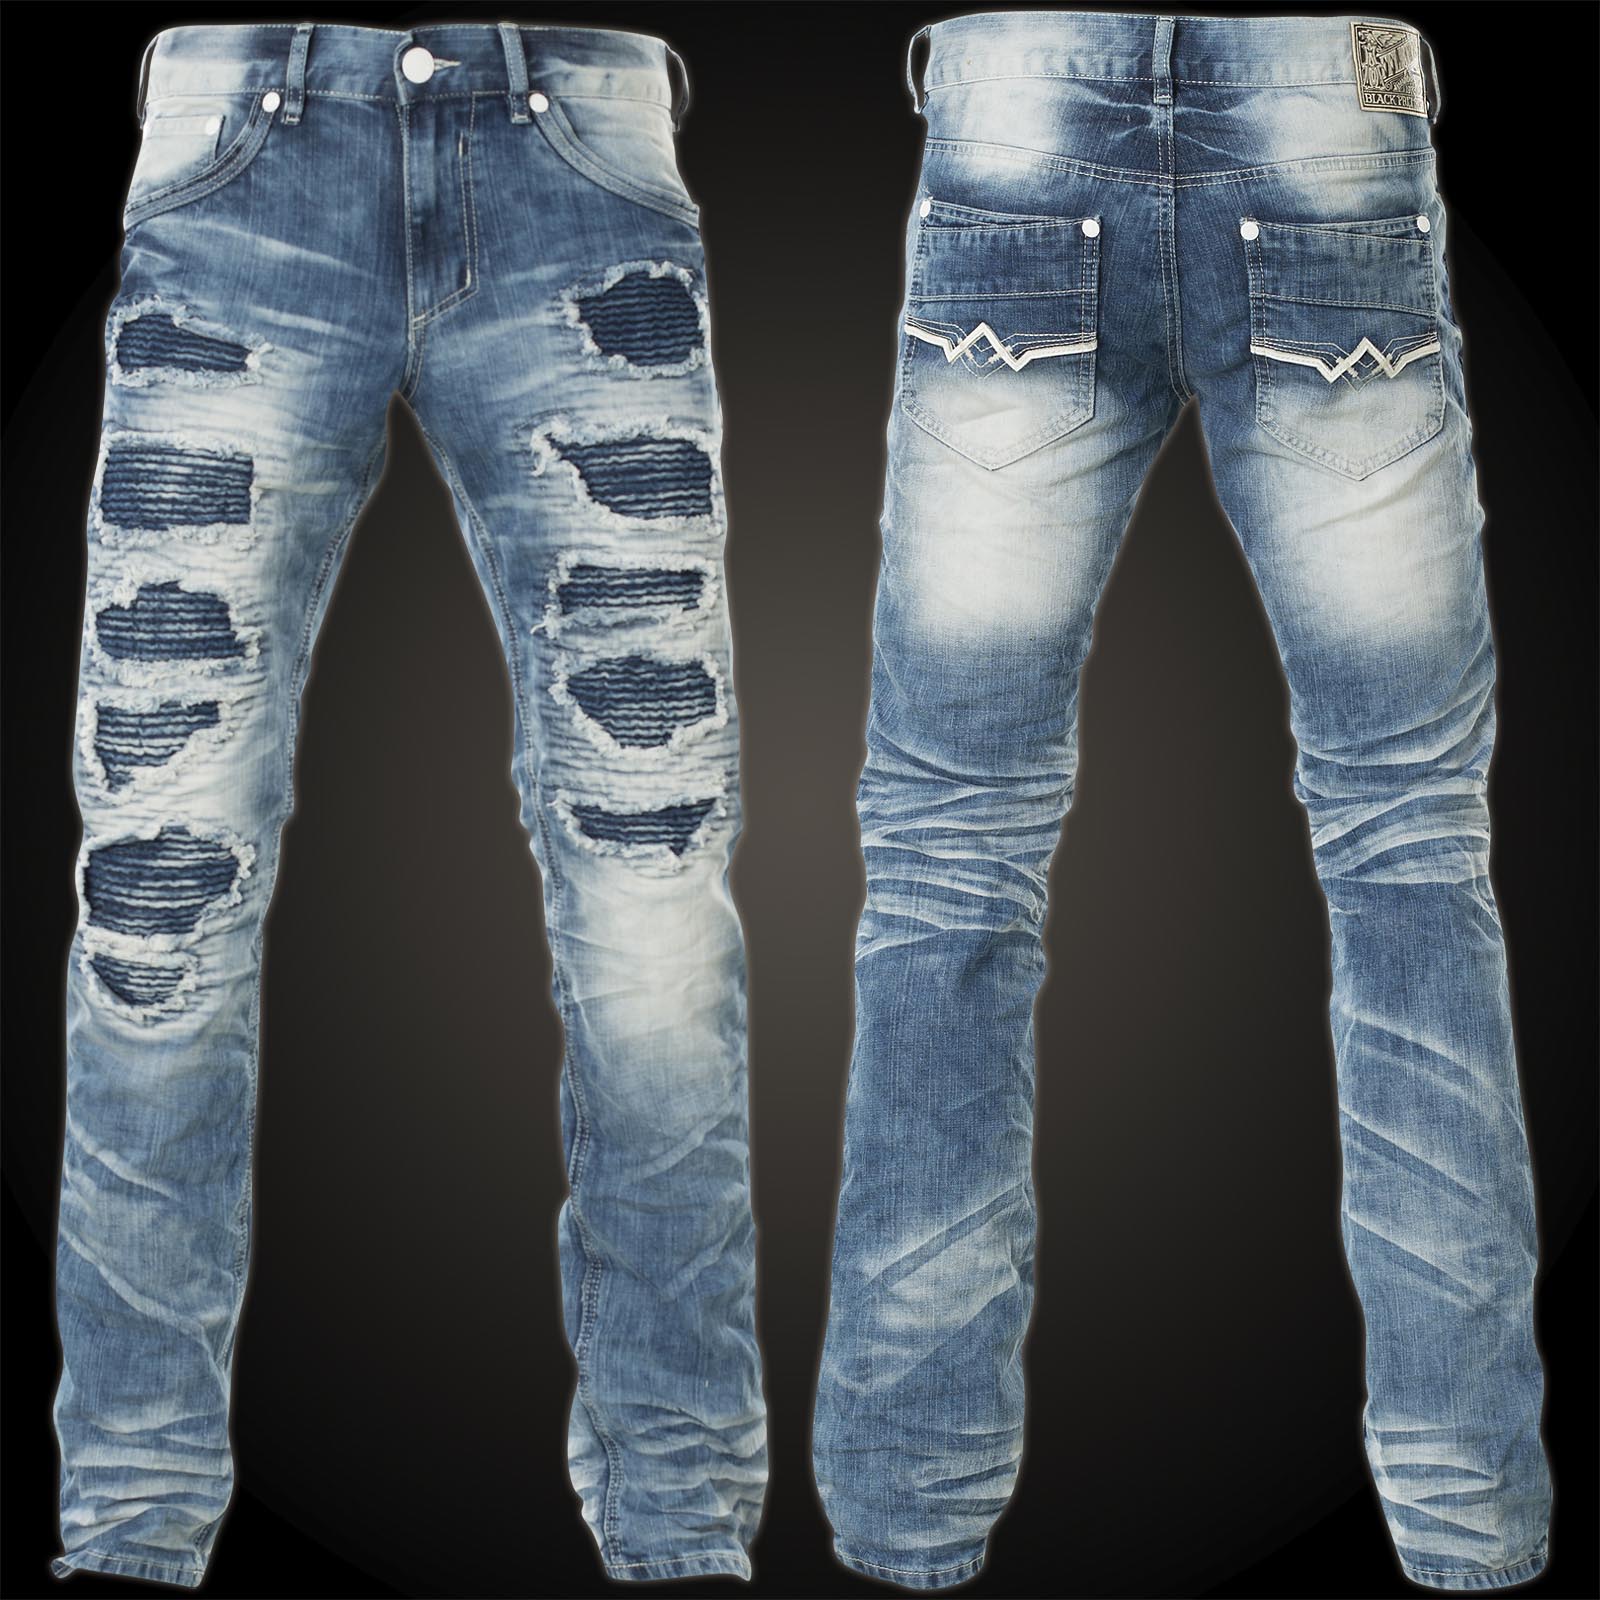 Affliction Jeans Gage Standard Trenton with decorative fabric insertions